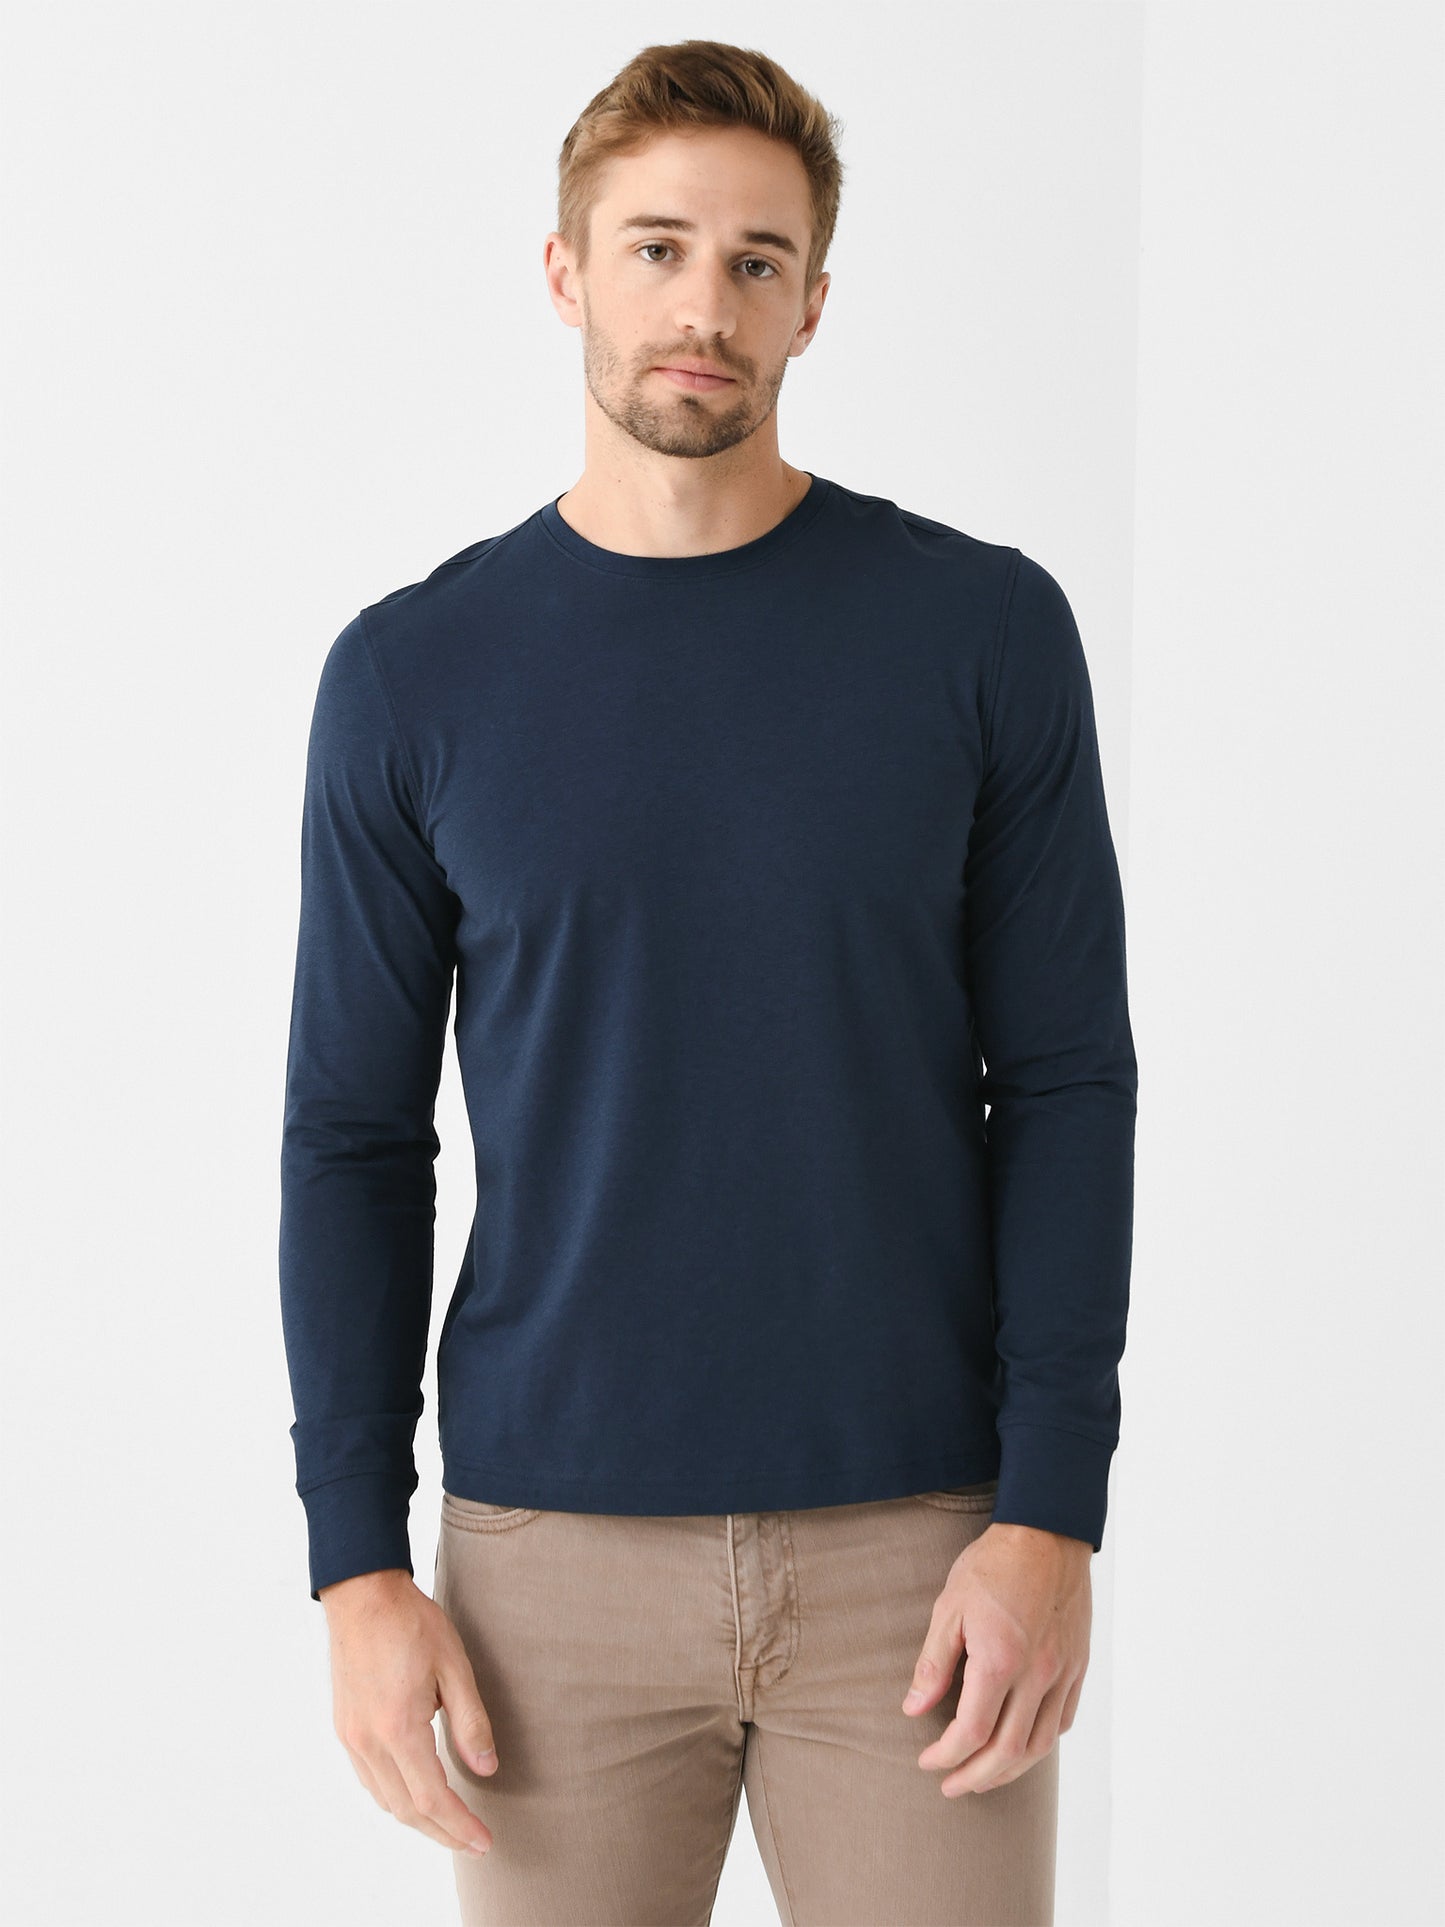 Orchard + Broome Men's Ludlow Stretch Long Sleeve Tee